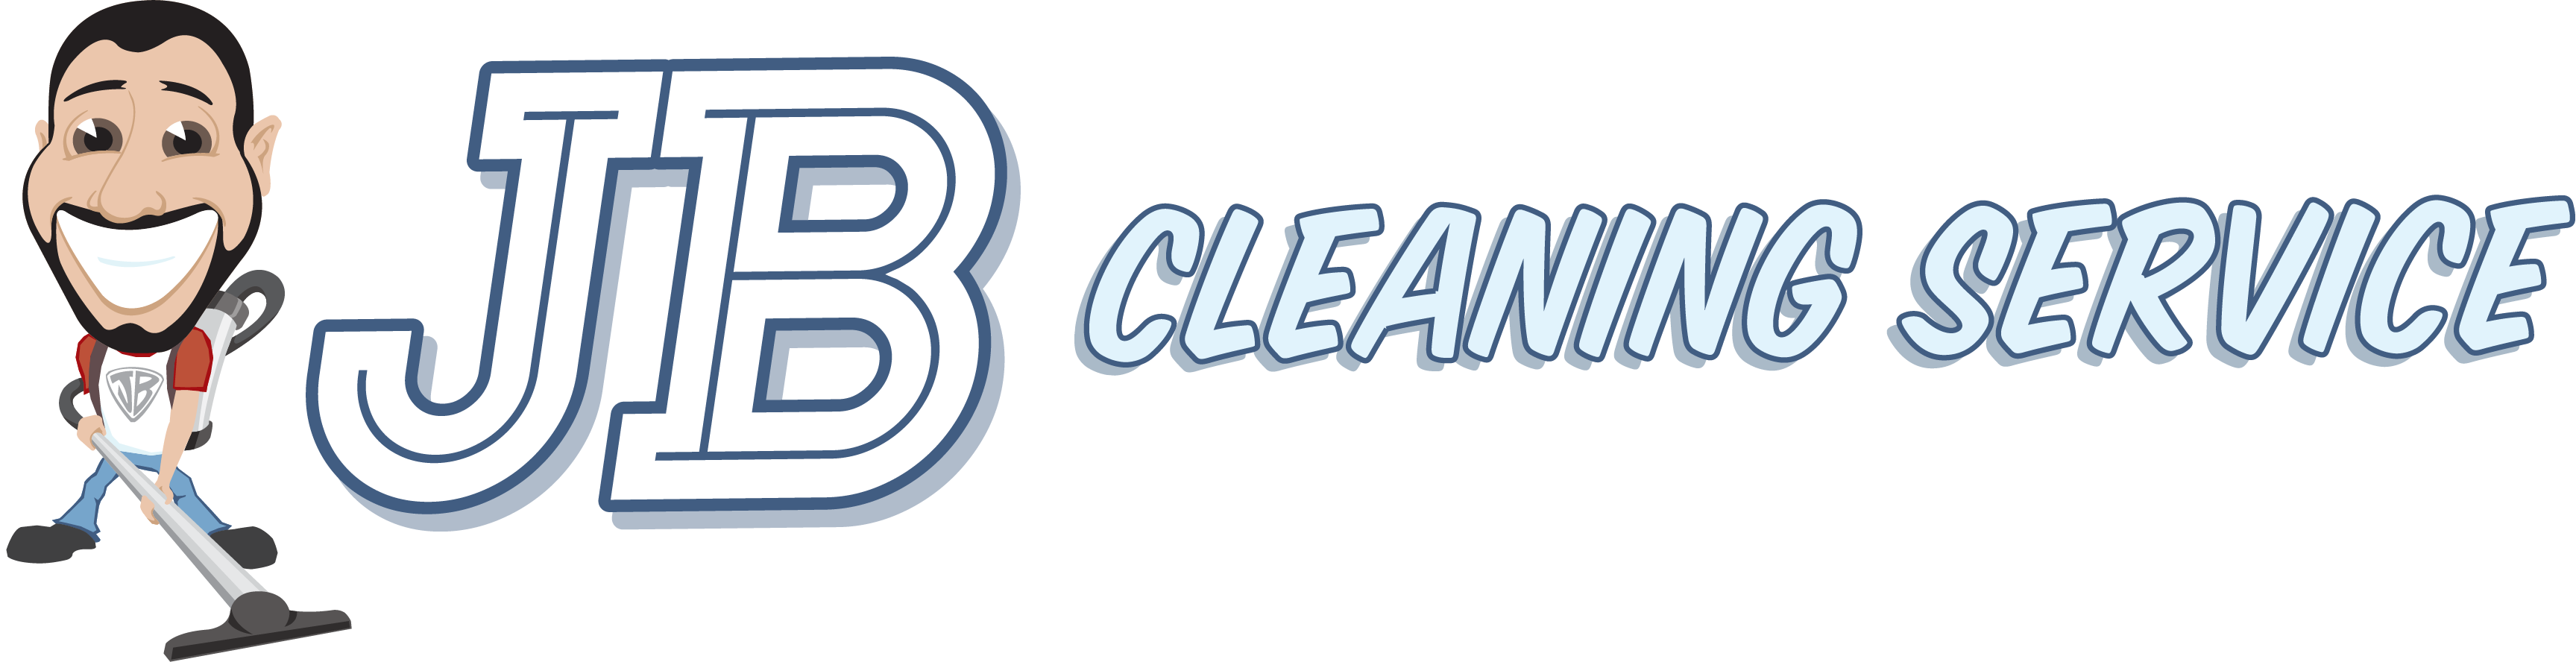 JB Cleaning Services